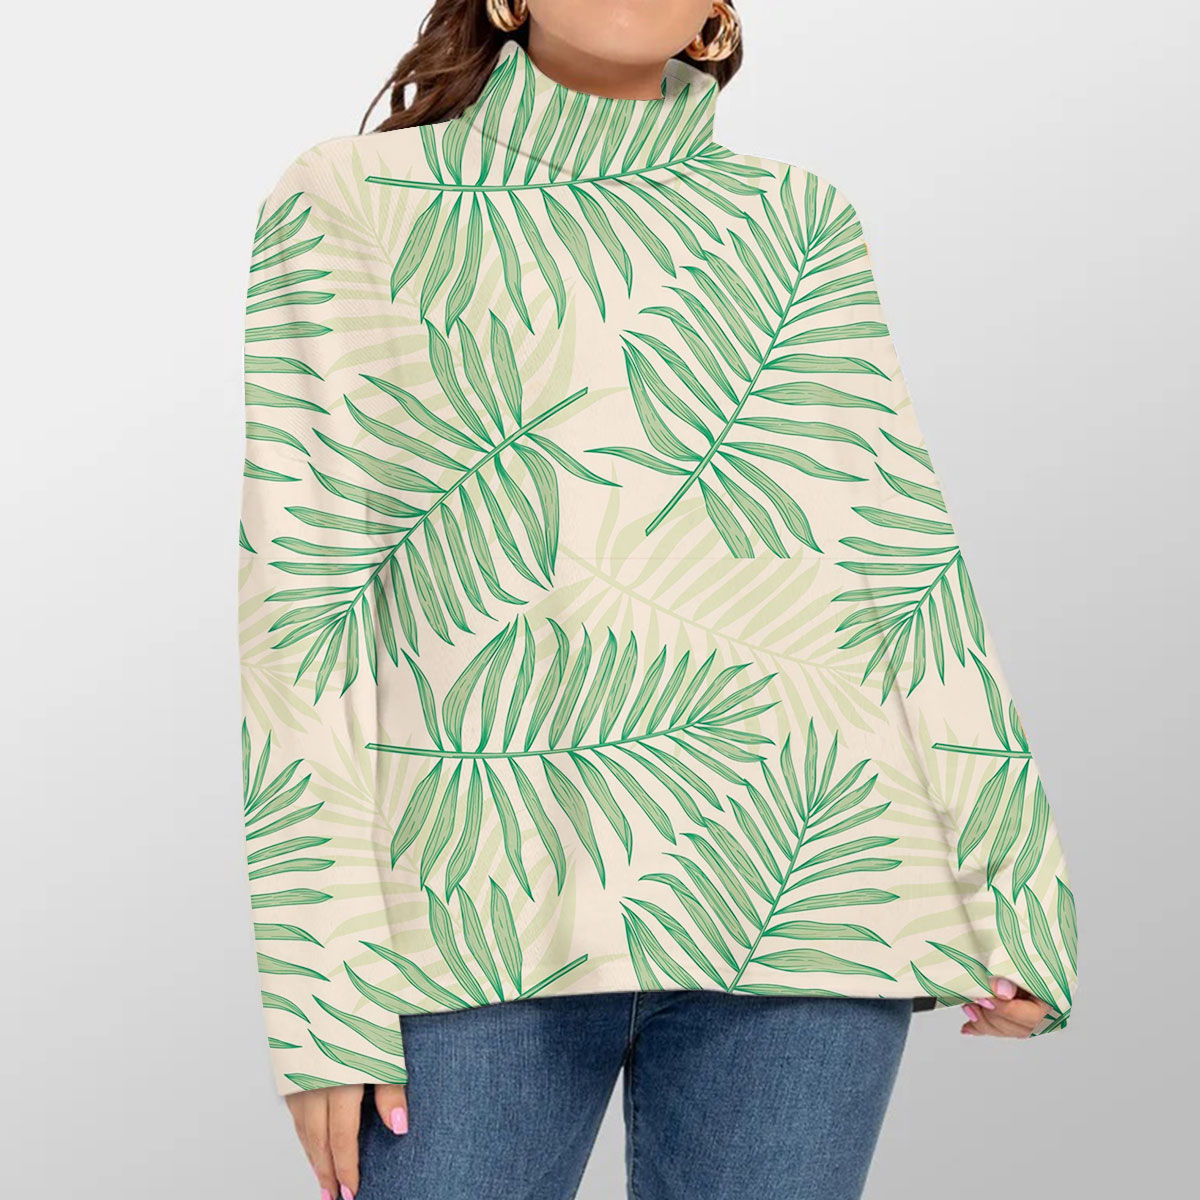 Tropical Palm Leaves Turtleneck Sweater